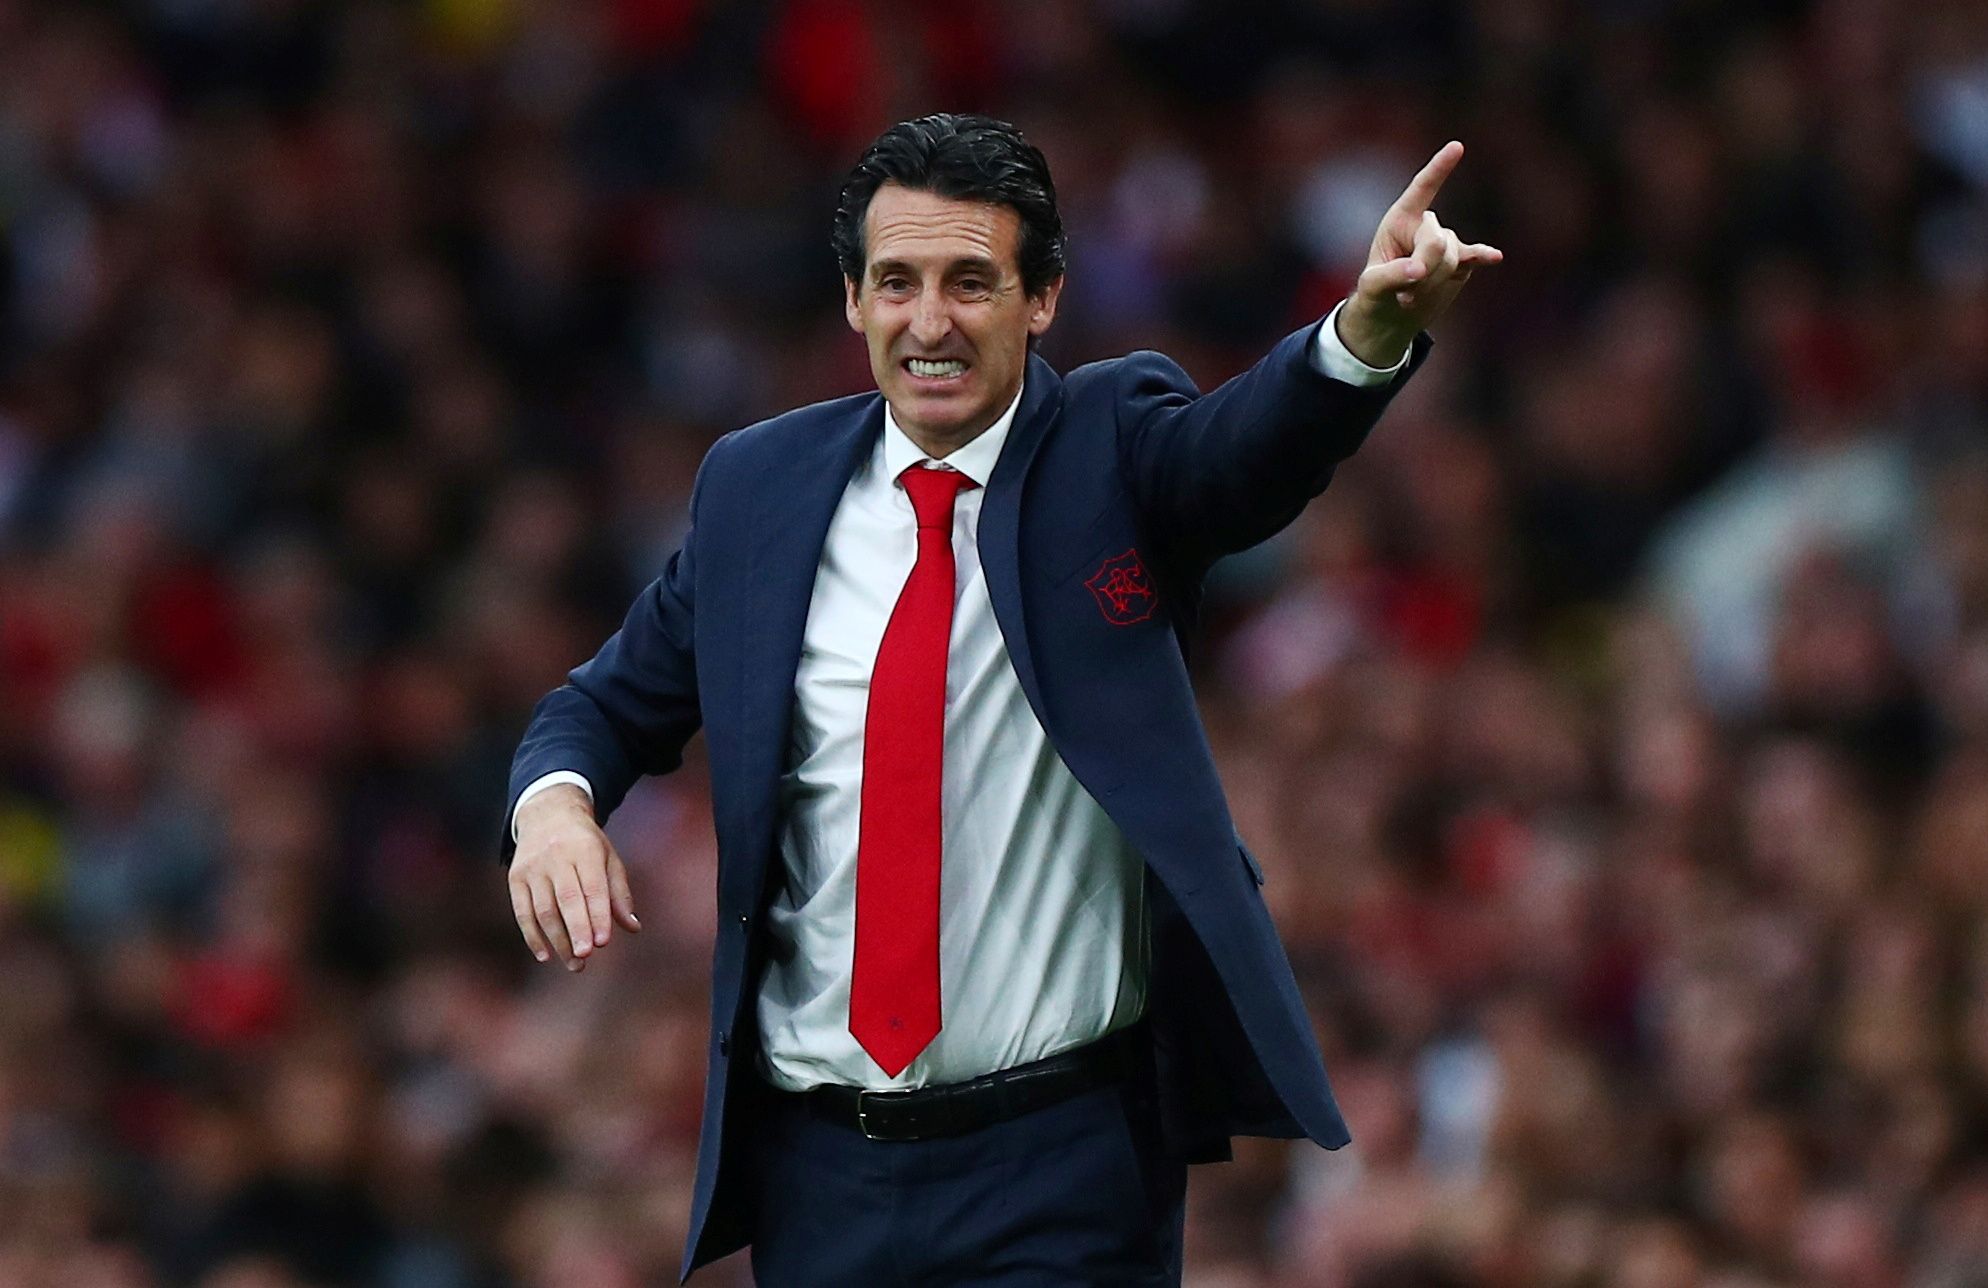 Soccer Football - Premier League - Arsenal v Aston Villa - Emirates Stadium, London, Britain - September 22, 2019  Arsenal manager Unai Emery gestures  REUTERS/Hannah McKay  EDITORIAL USE ONLY. No use with unauthorized audio, video, data, fixture lists, club/league logos or 